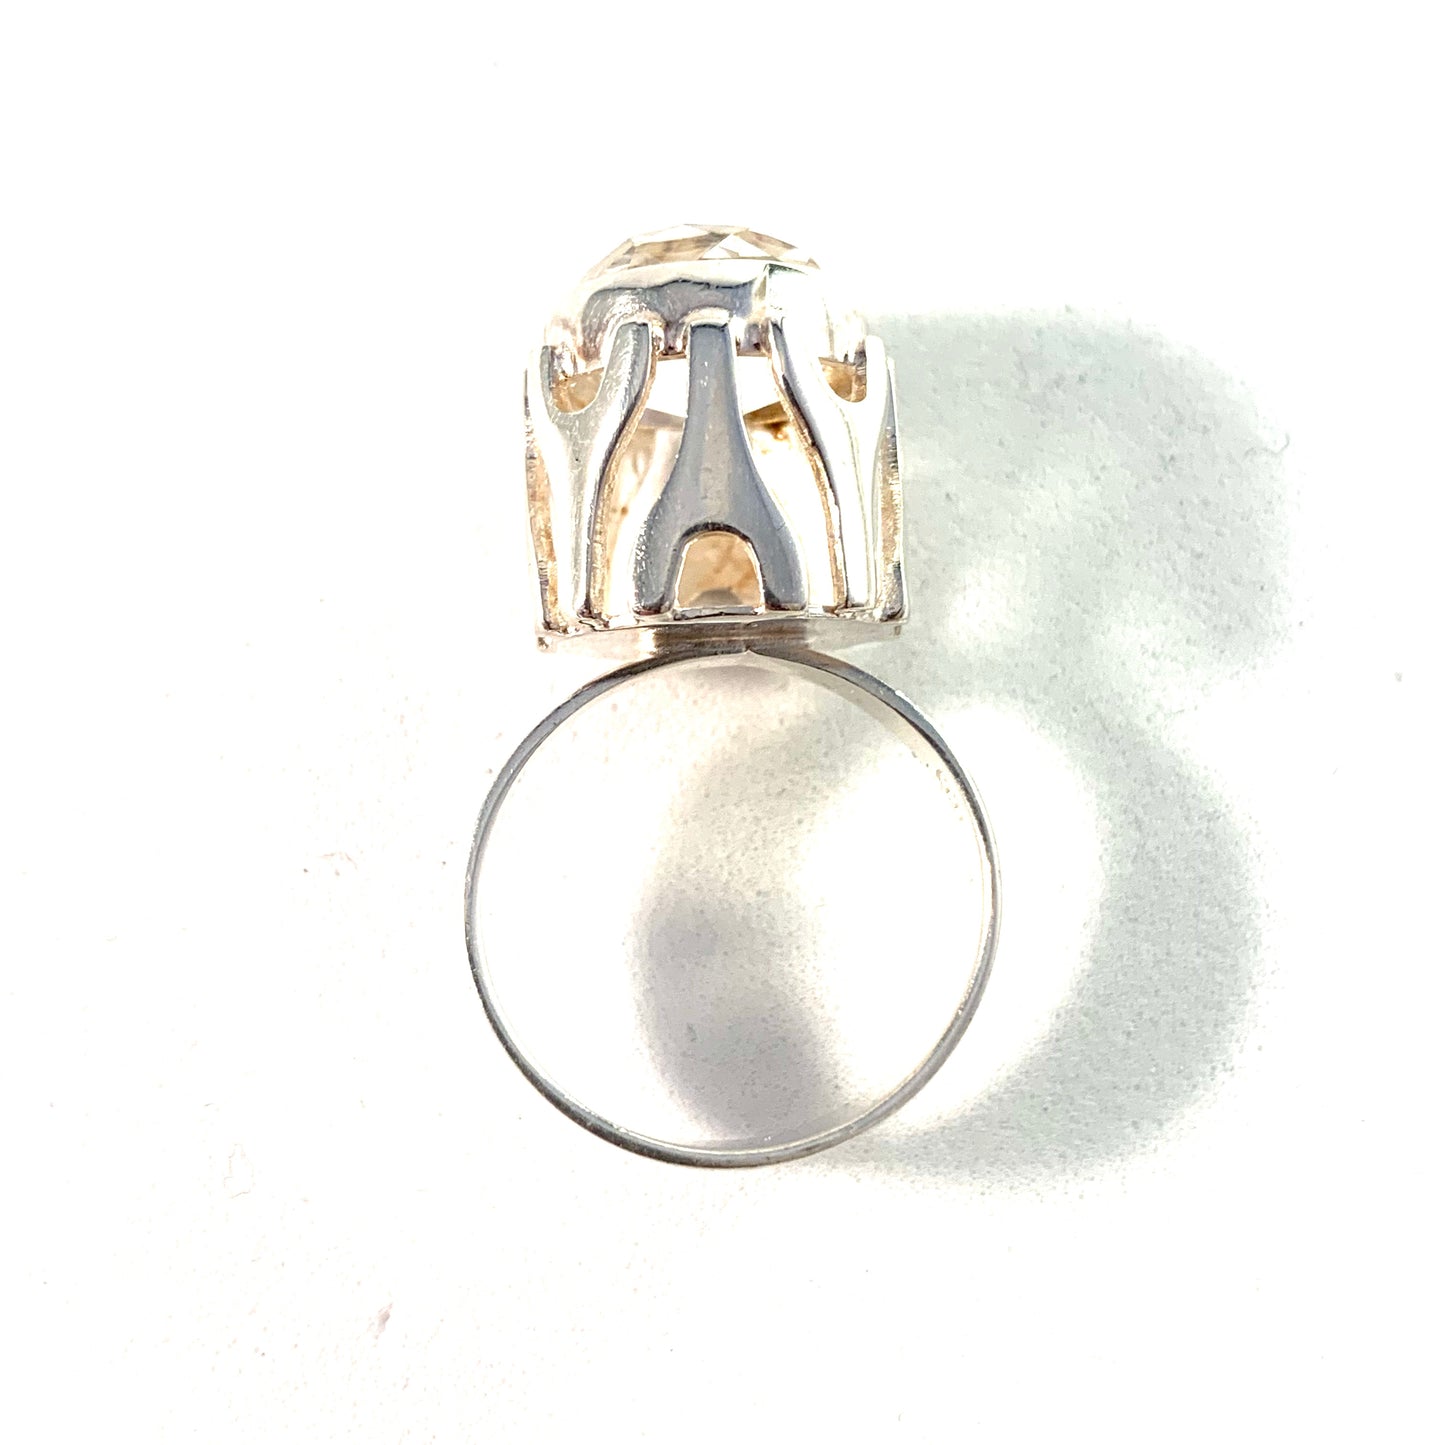 Germany 1960s Modernist 835 Silver Rock Crystal Ring.